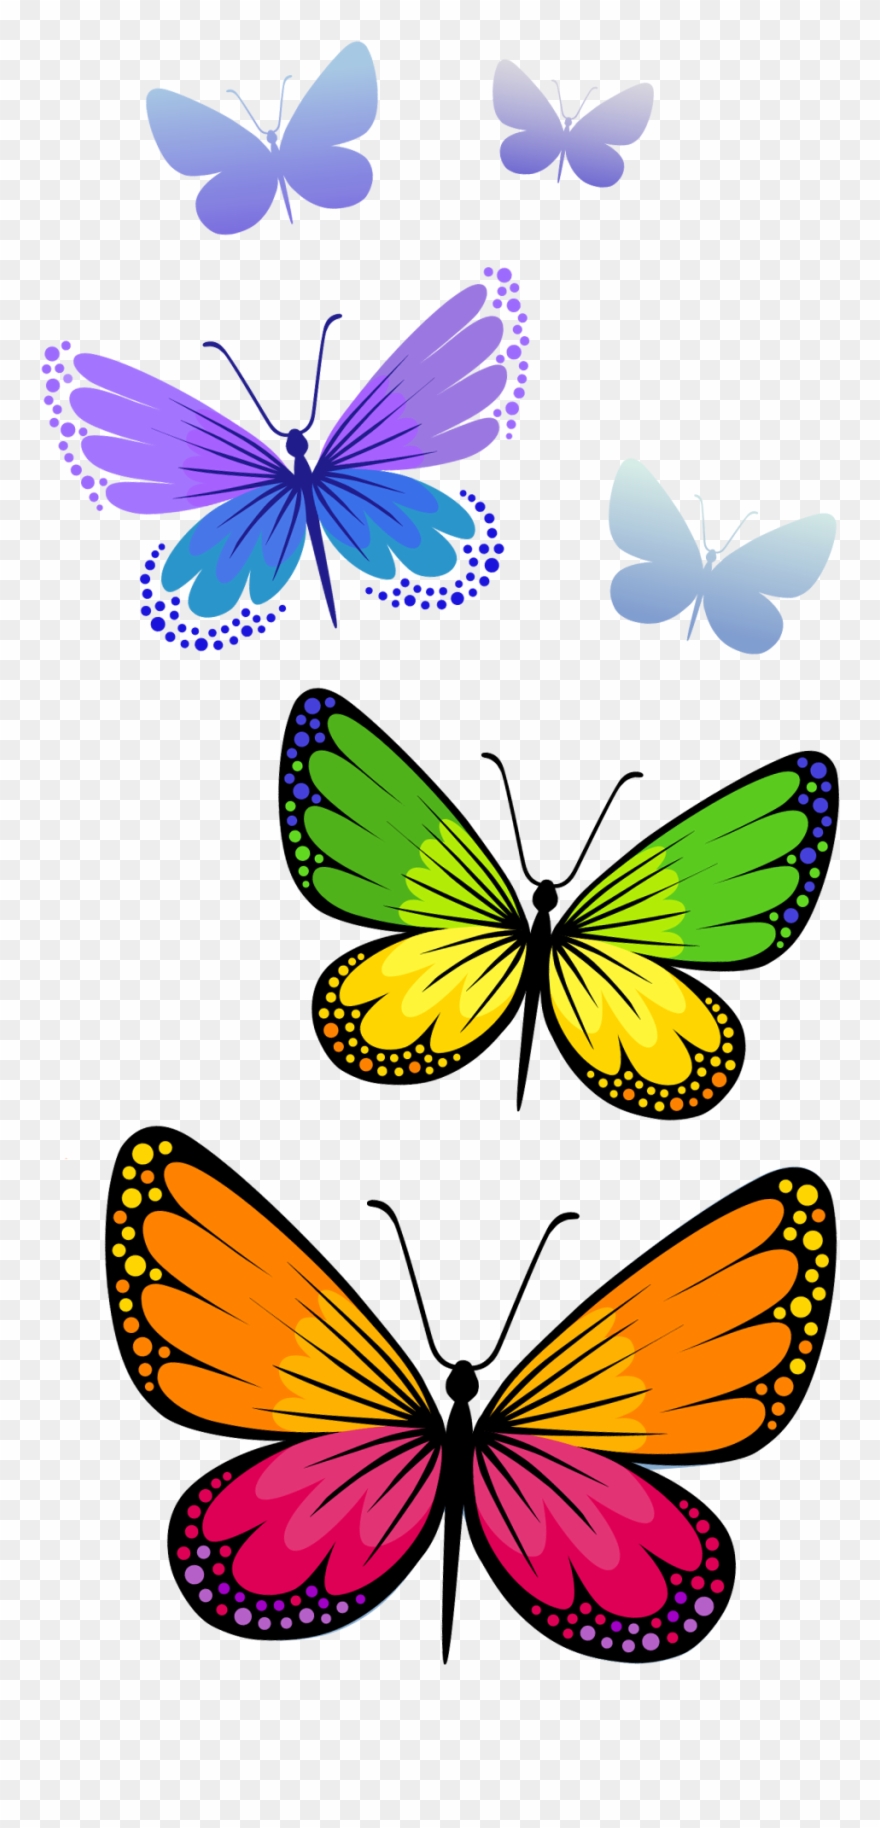 Free butterfly clipart clipart images gallery for free